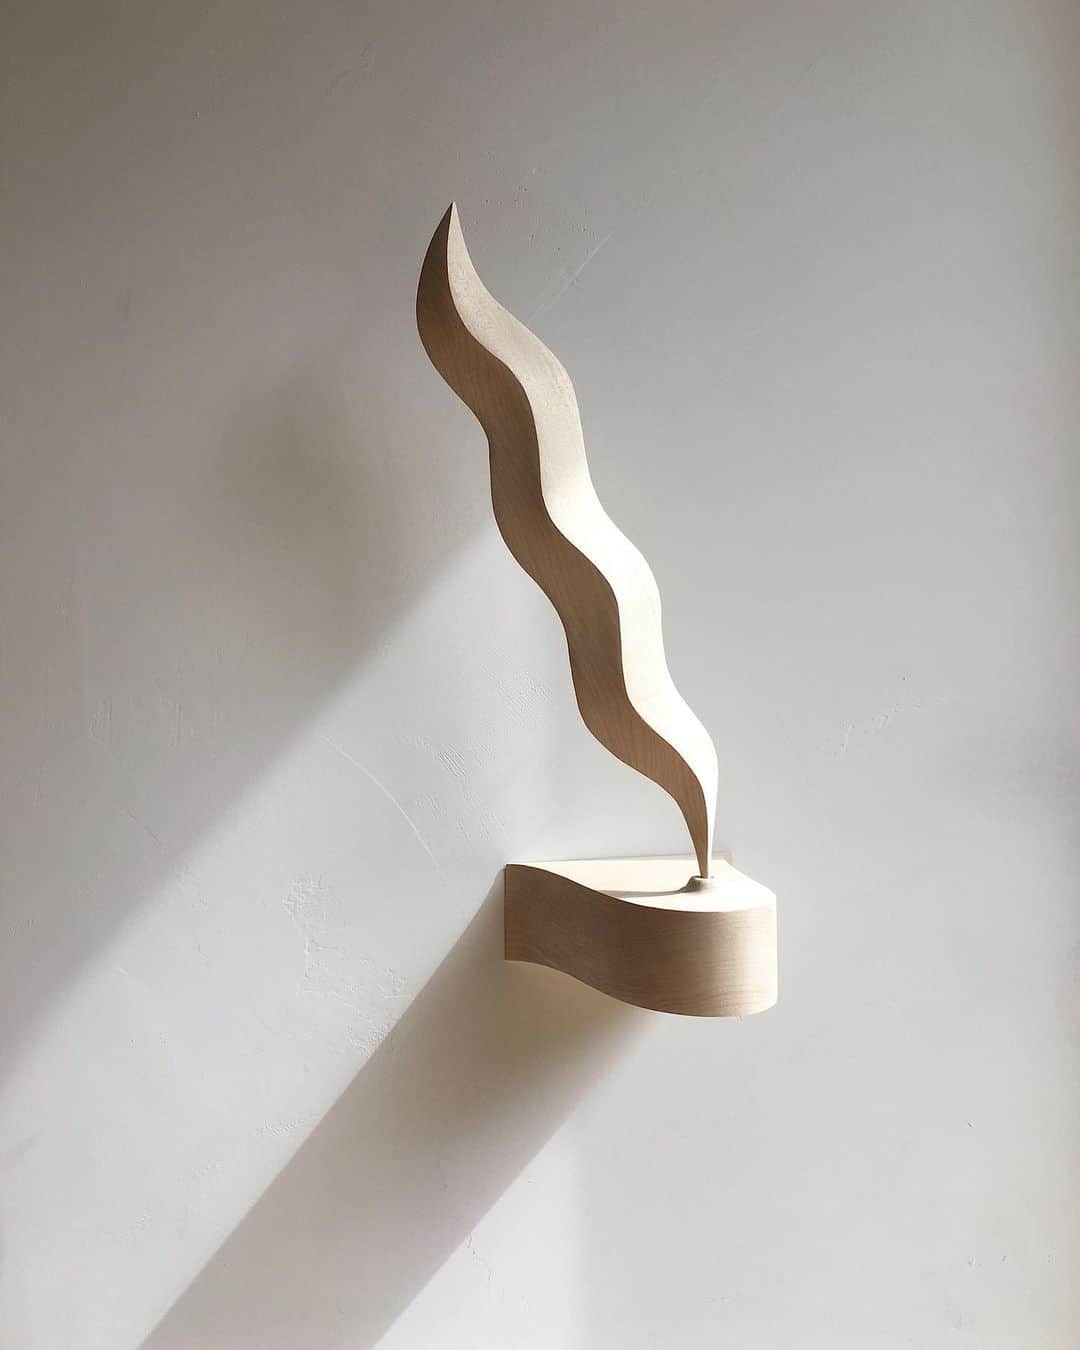 Ariele Alaskoのインスタグラム：「wall mounted sculpture I made today, using off cuts from the larger mobile pieces.  Quarantine Sculpture # 5, Day Thirteen. 18” tall. Carved maple.  #artmadeinquarantine」